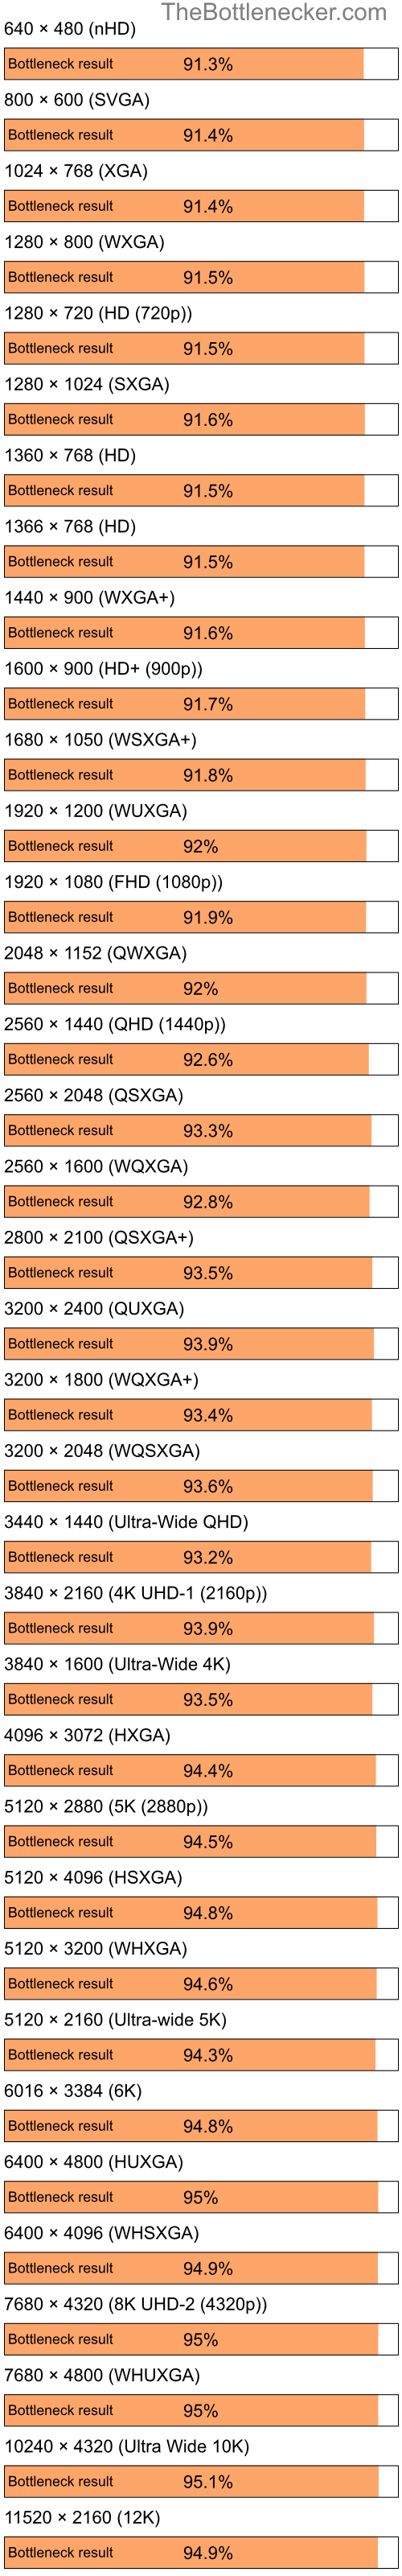 Bottleneck results by resolution for Intel Pentium 4 and NVIDIA GeForce4 MX 4000 in Graphic Card Intense Tasks